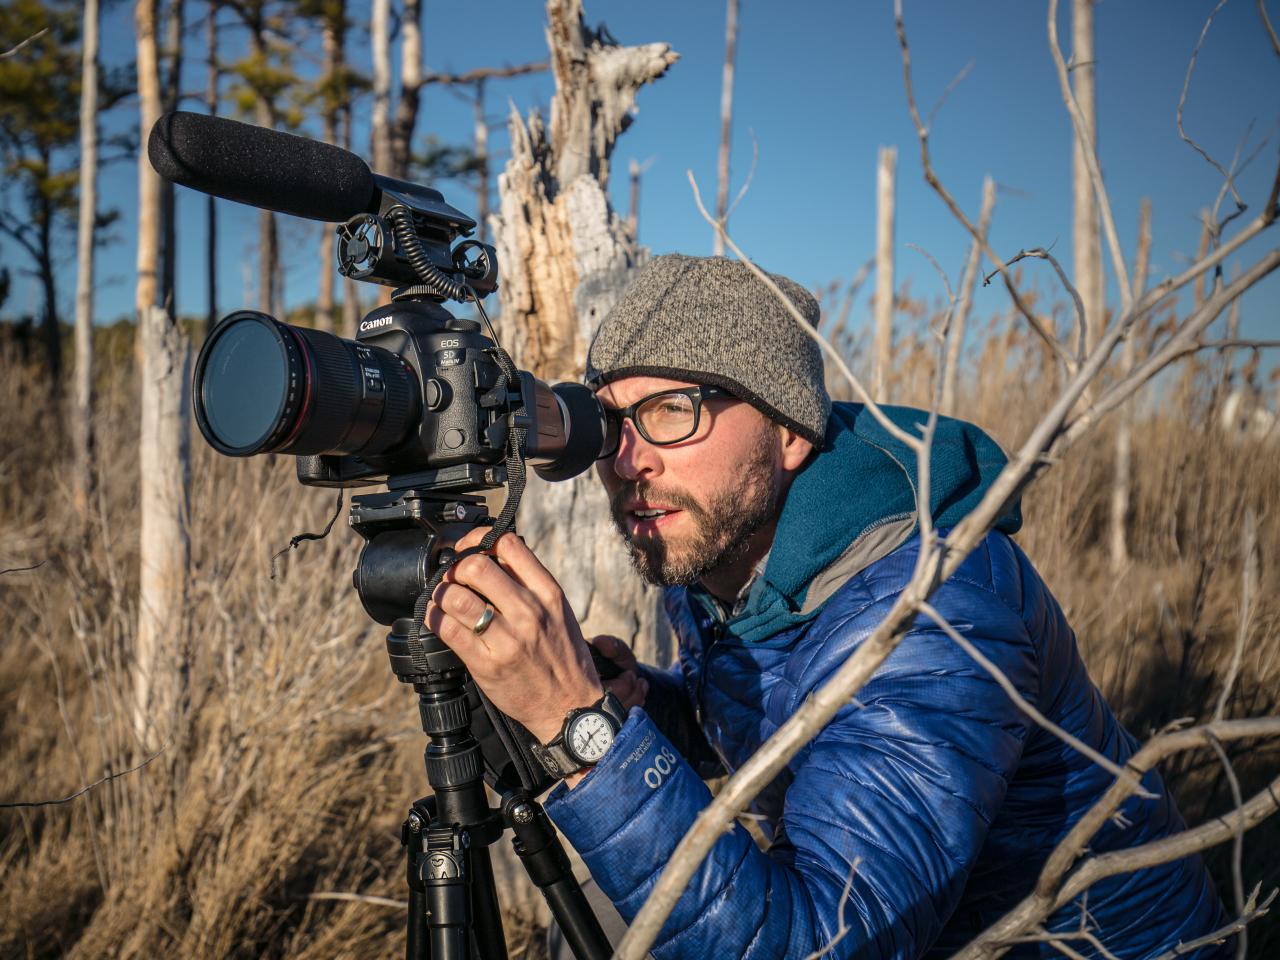 New Day Member Michael O. Synder crouches in a field and looks through a camera that’s mounted on a tripod. The ground is brown, the trees are bare, and Michael wears a blue winter jacket.